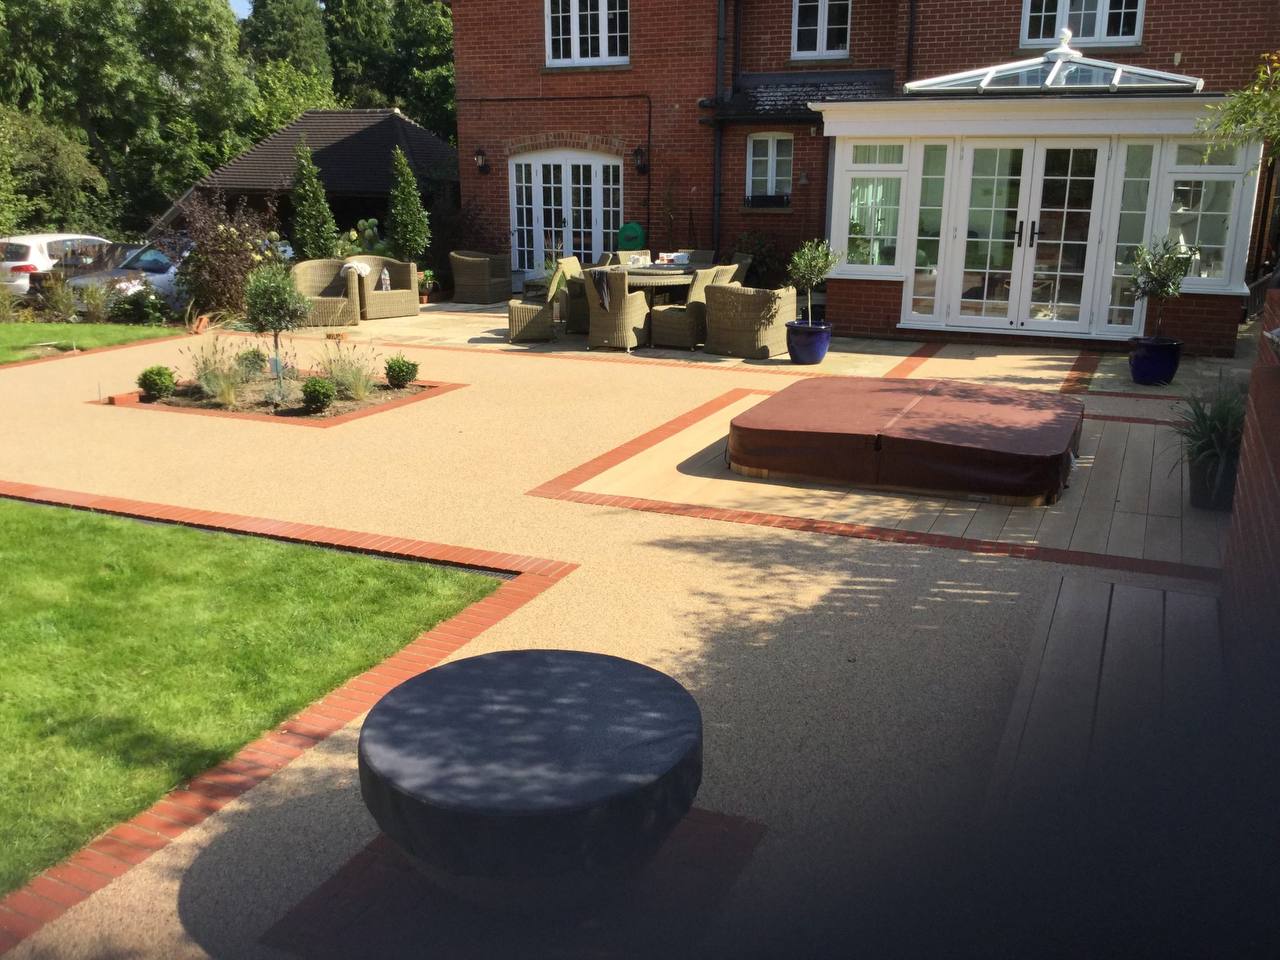 This is a photo of a Resin bound patio carried out in York. All works done by Resin Driveways York